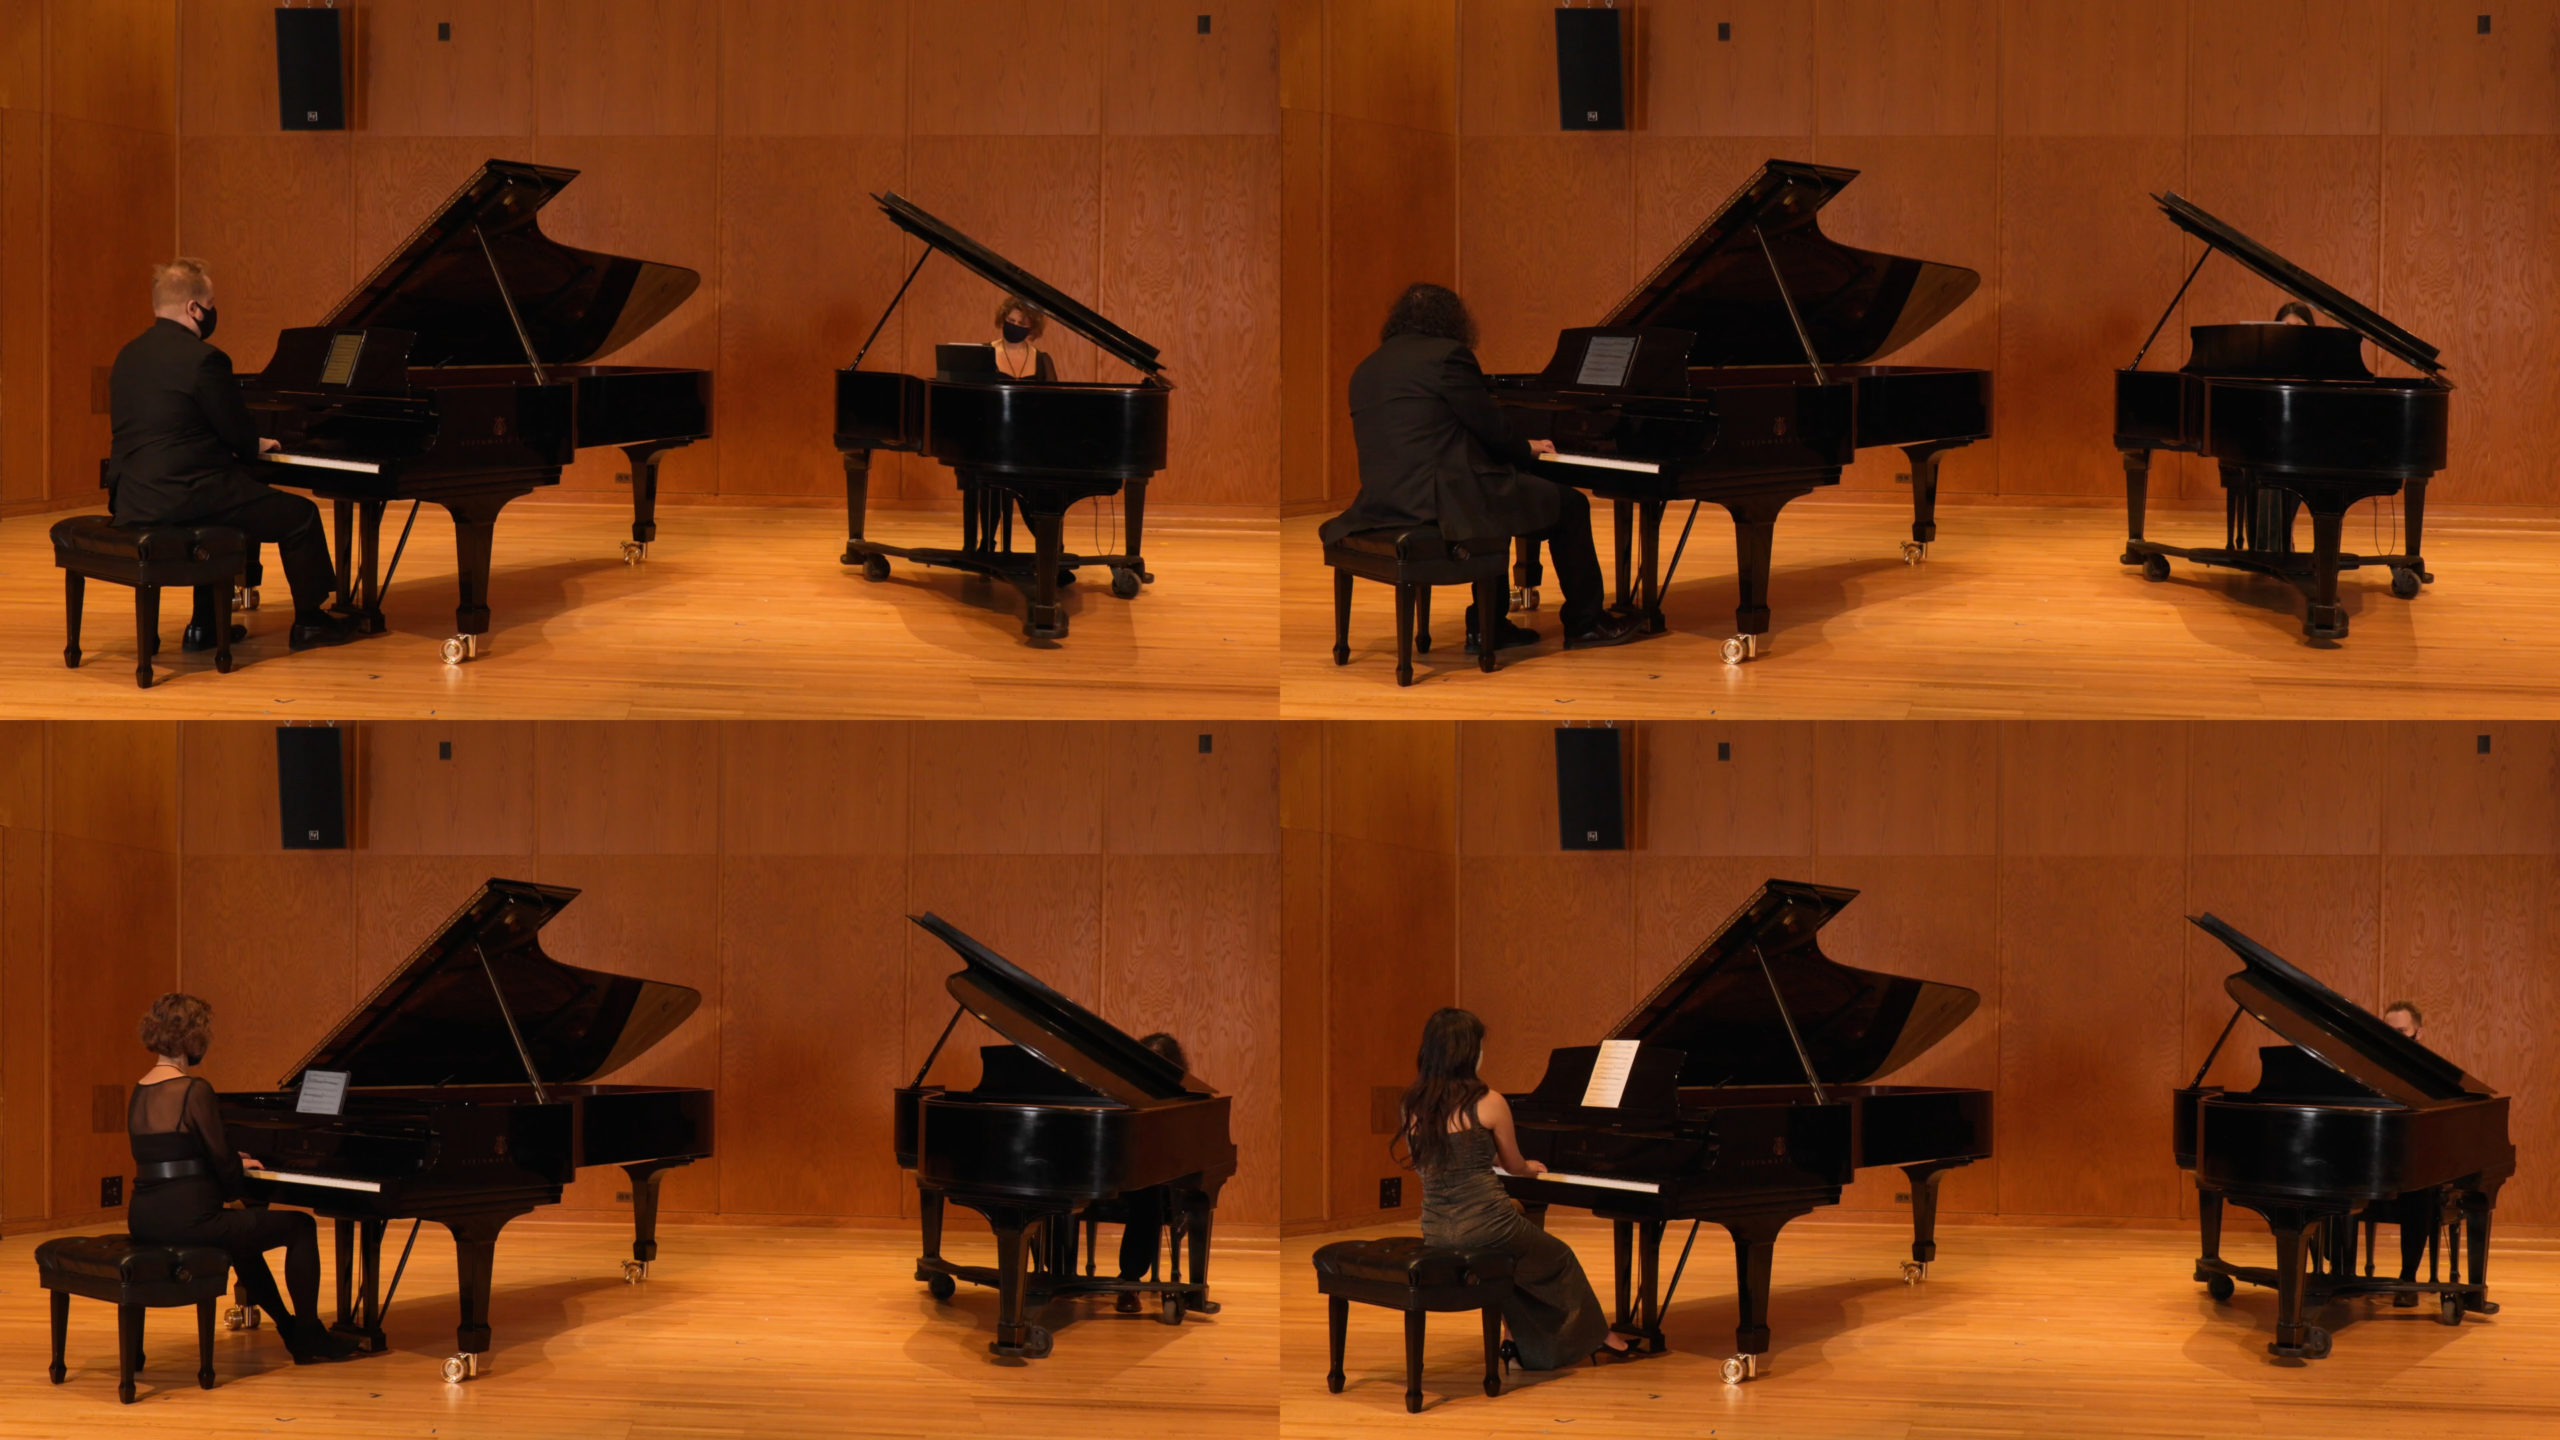 Compound image showing two open grand pianos in Britton Recital Hall at a time with a different configuration of performers in each version.